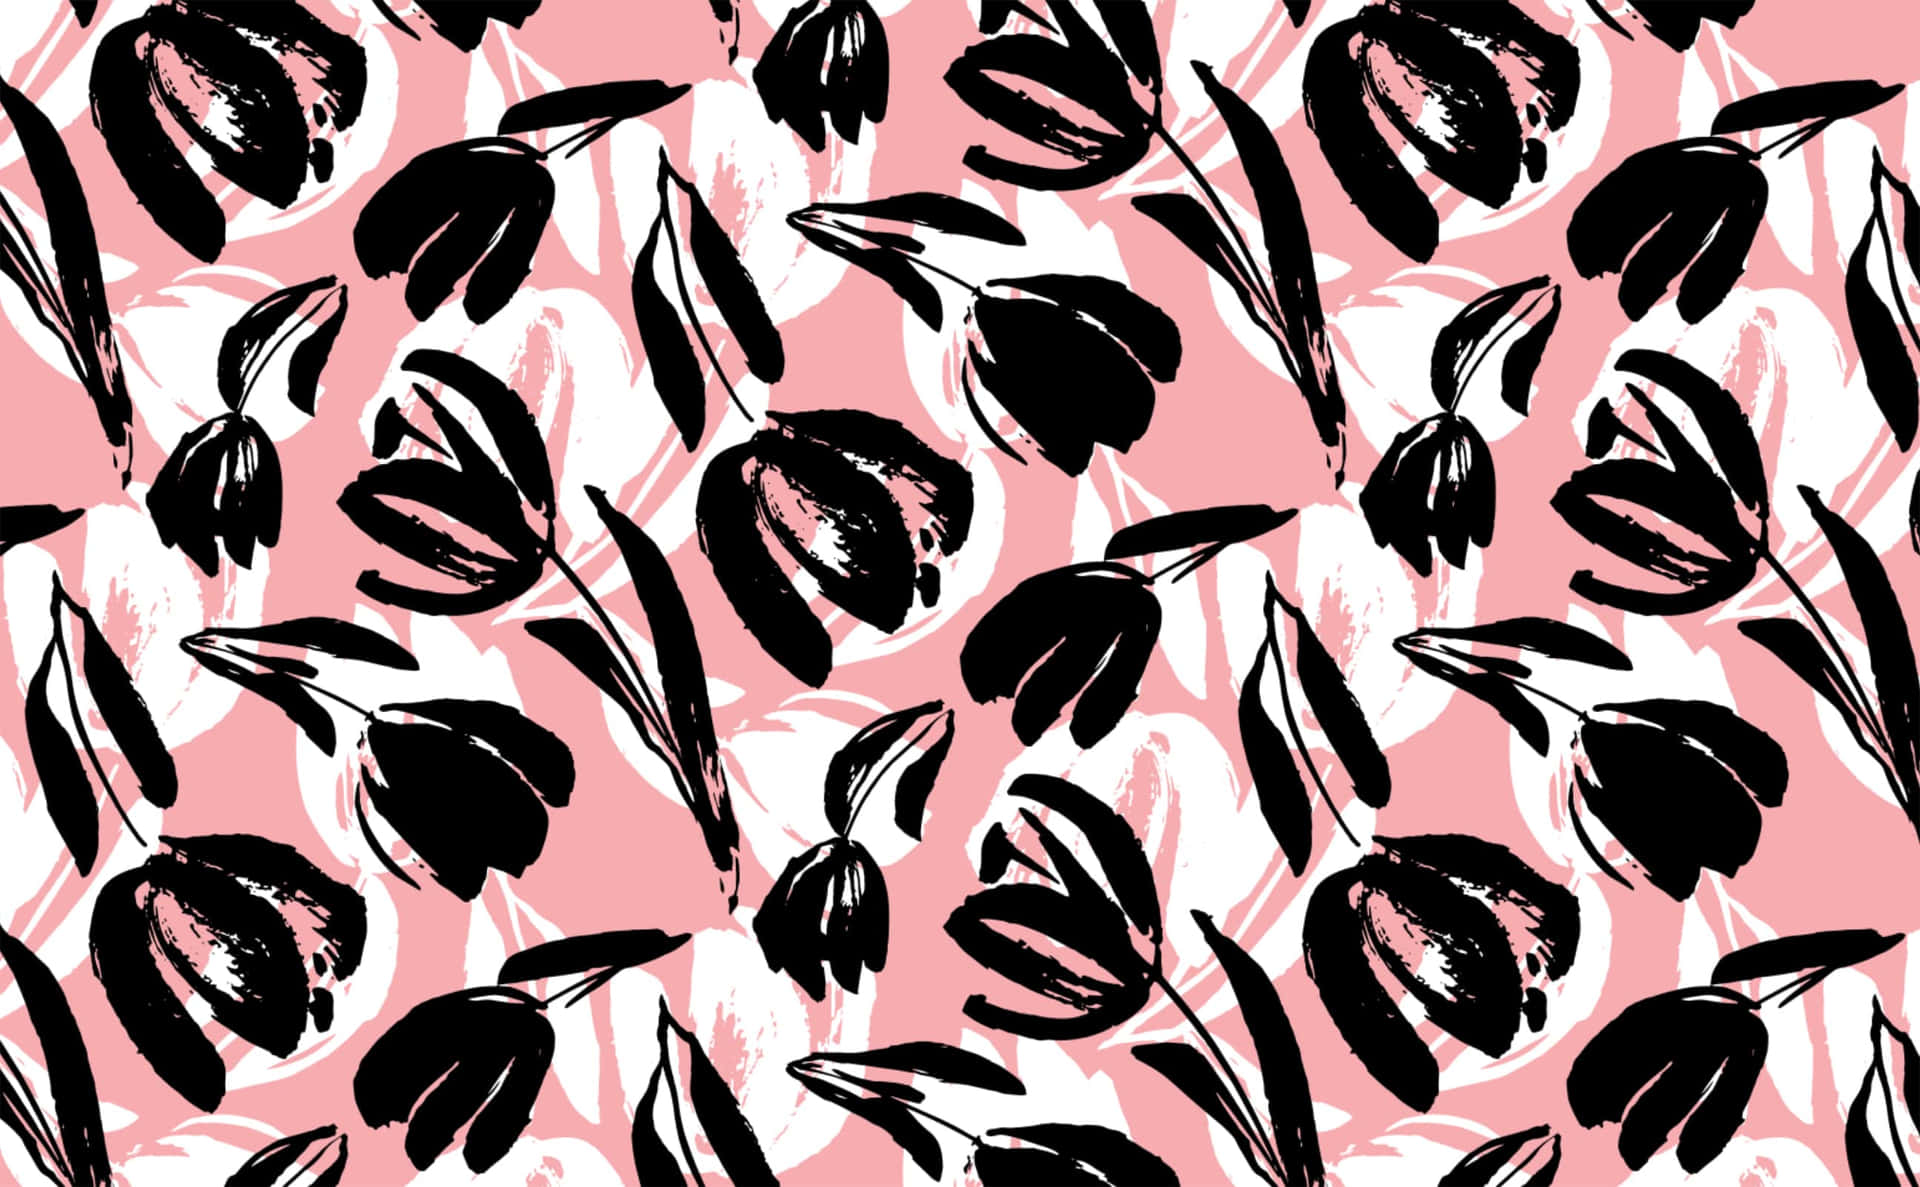 Abstraction of Color in Pink, Black, and White Wallpaper